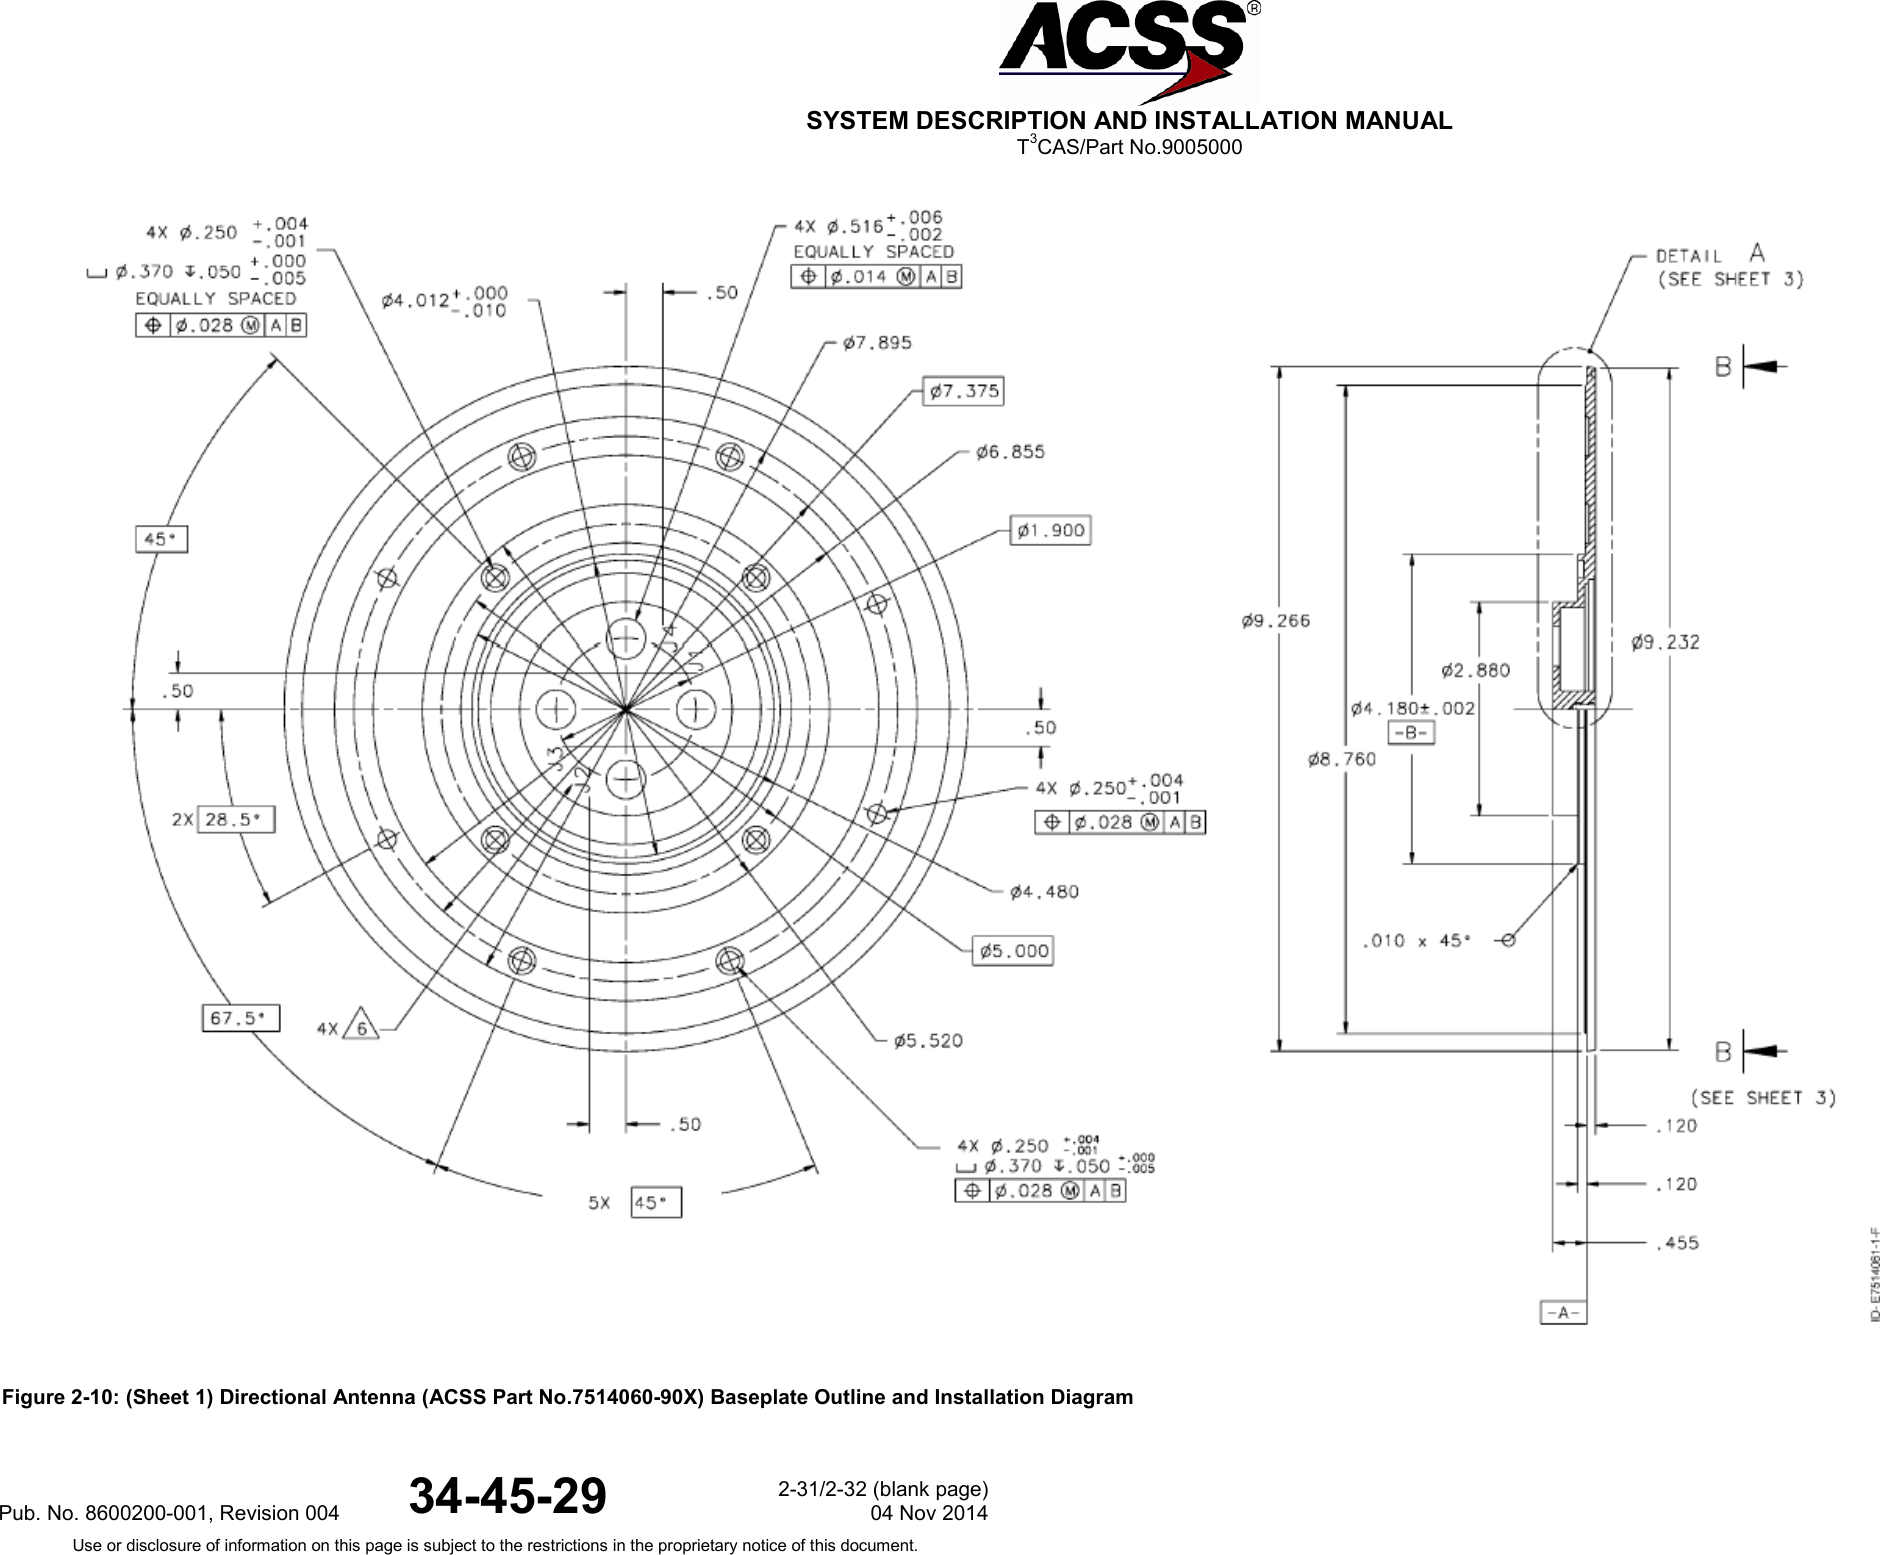  SYSTEM DESCRIPTION AND INSTALLATION MANUAL T3CAS/Part No.9005000  Figure 2-10: (Sheet 1) Directional Antenna (ACSS Part No.7514060-90X) Baseplate Outline and Installation DiagramPub. No. 8600200-001, Revision 004 34-45-29 2-31/2-32 (blank page) 04 Nov 2014 Use or disclosure of information on this page is subject to the restrictions in the proprietary notice of this document.  